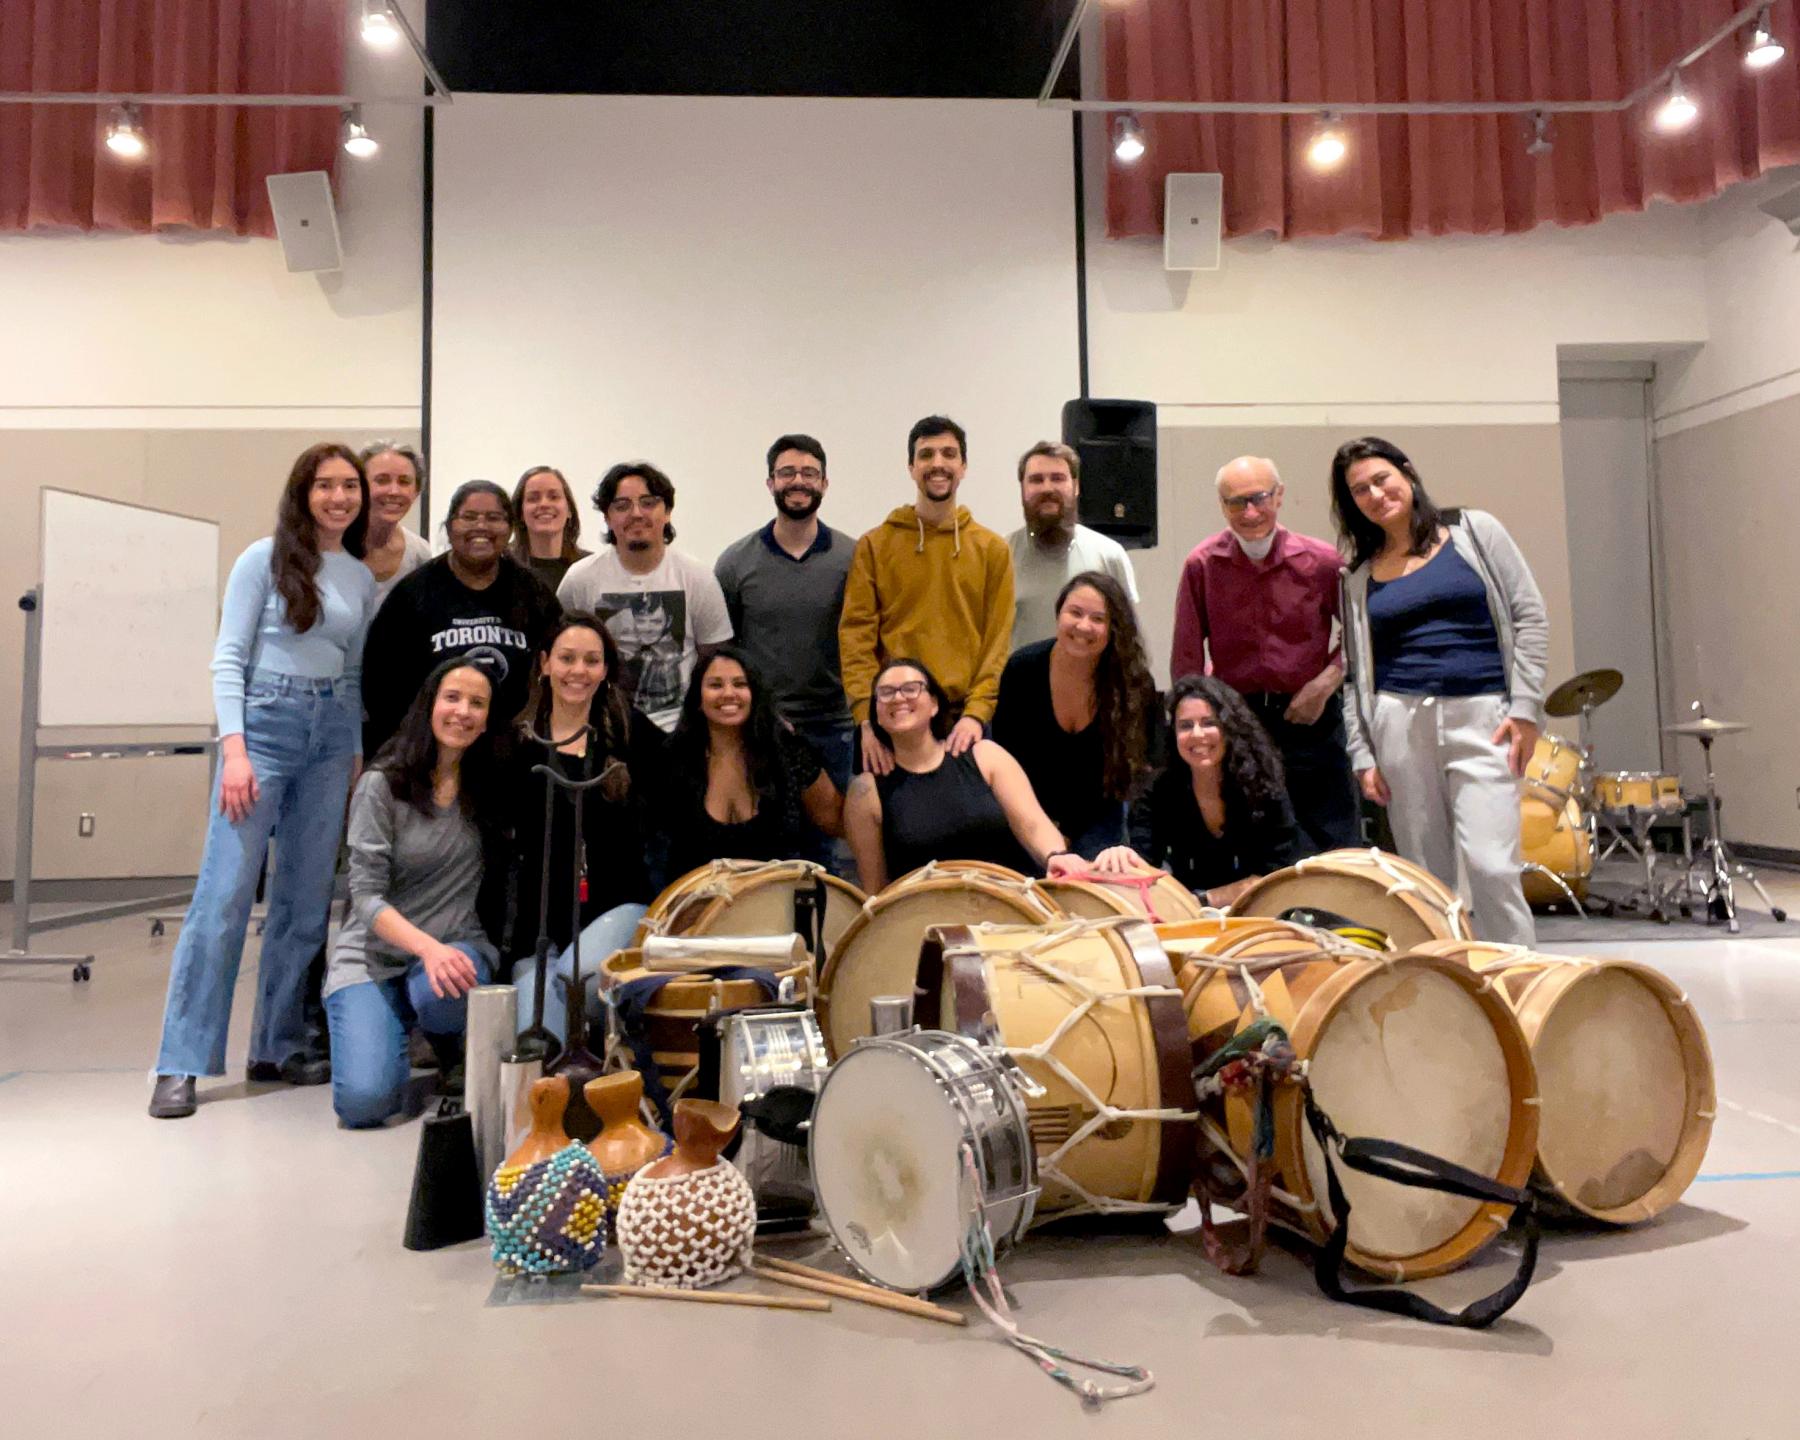 Group photos of the participants at the Brazilian Maracatu session. Taken in Winter 2023.